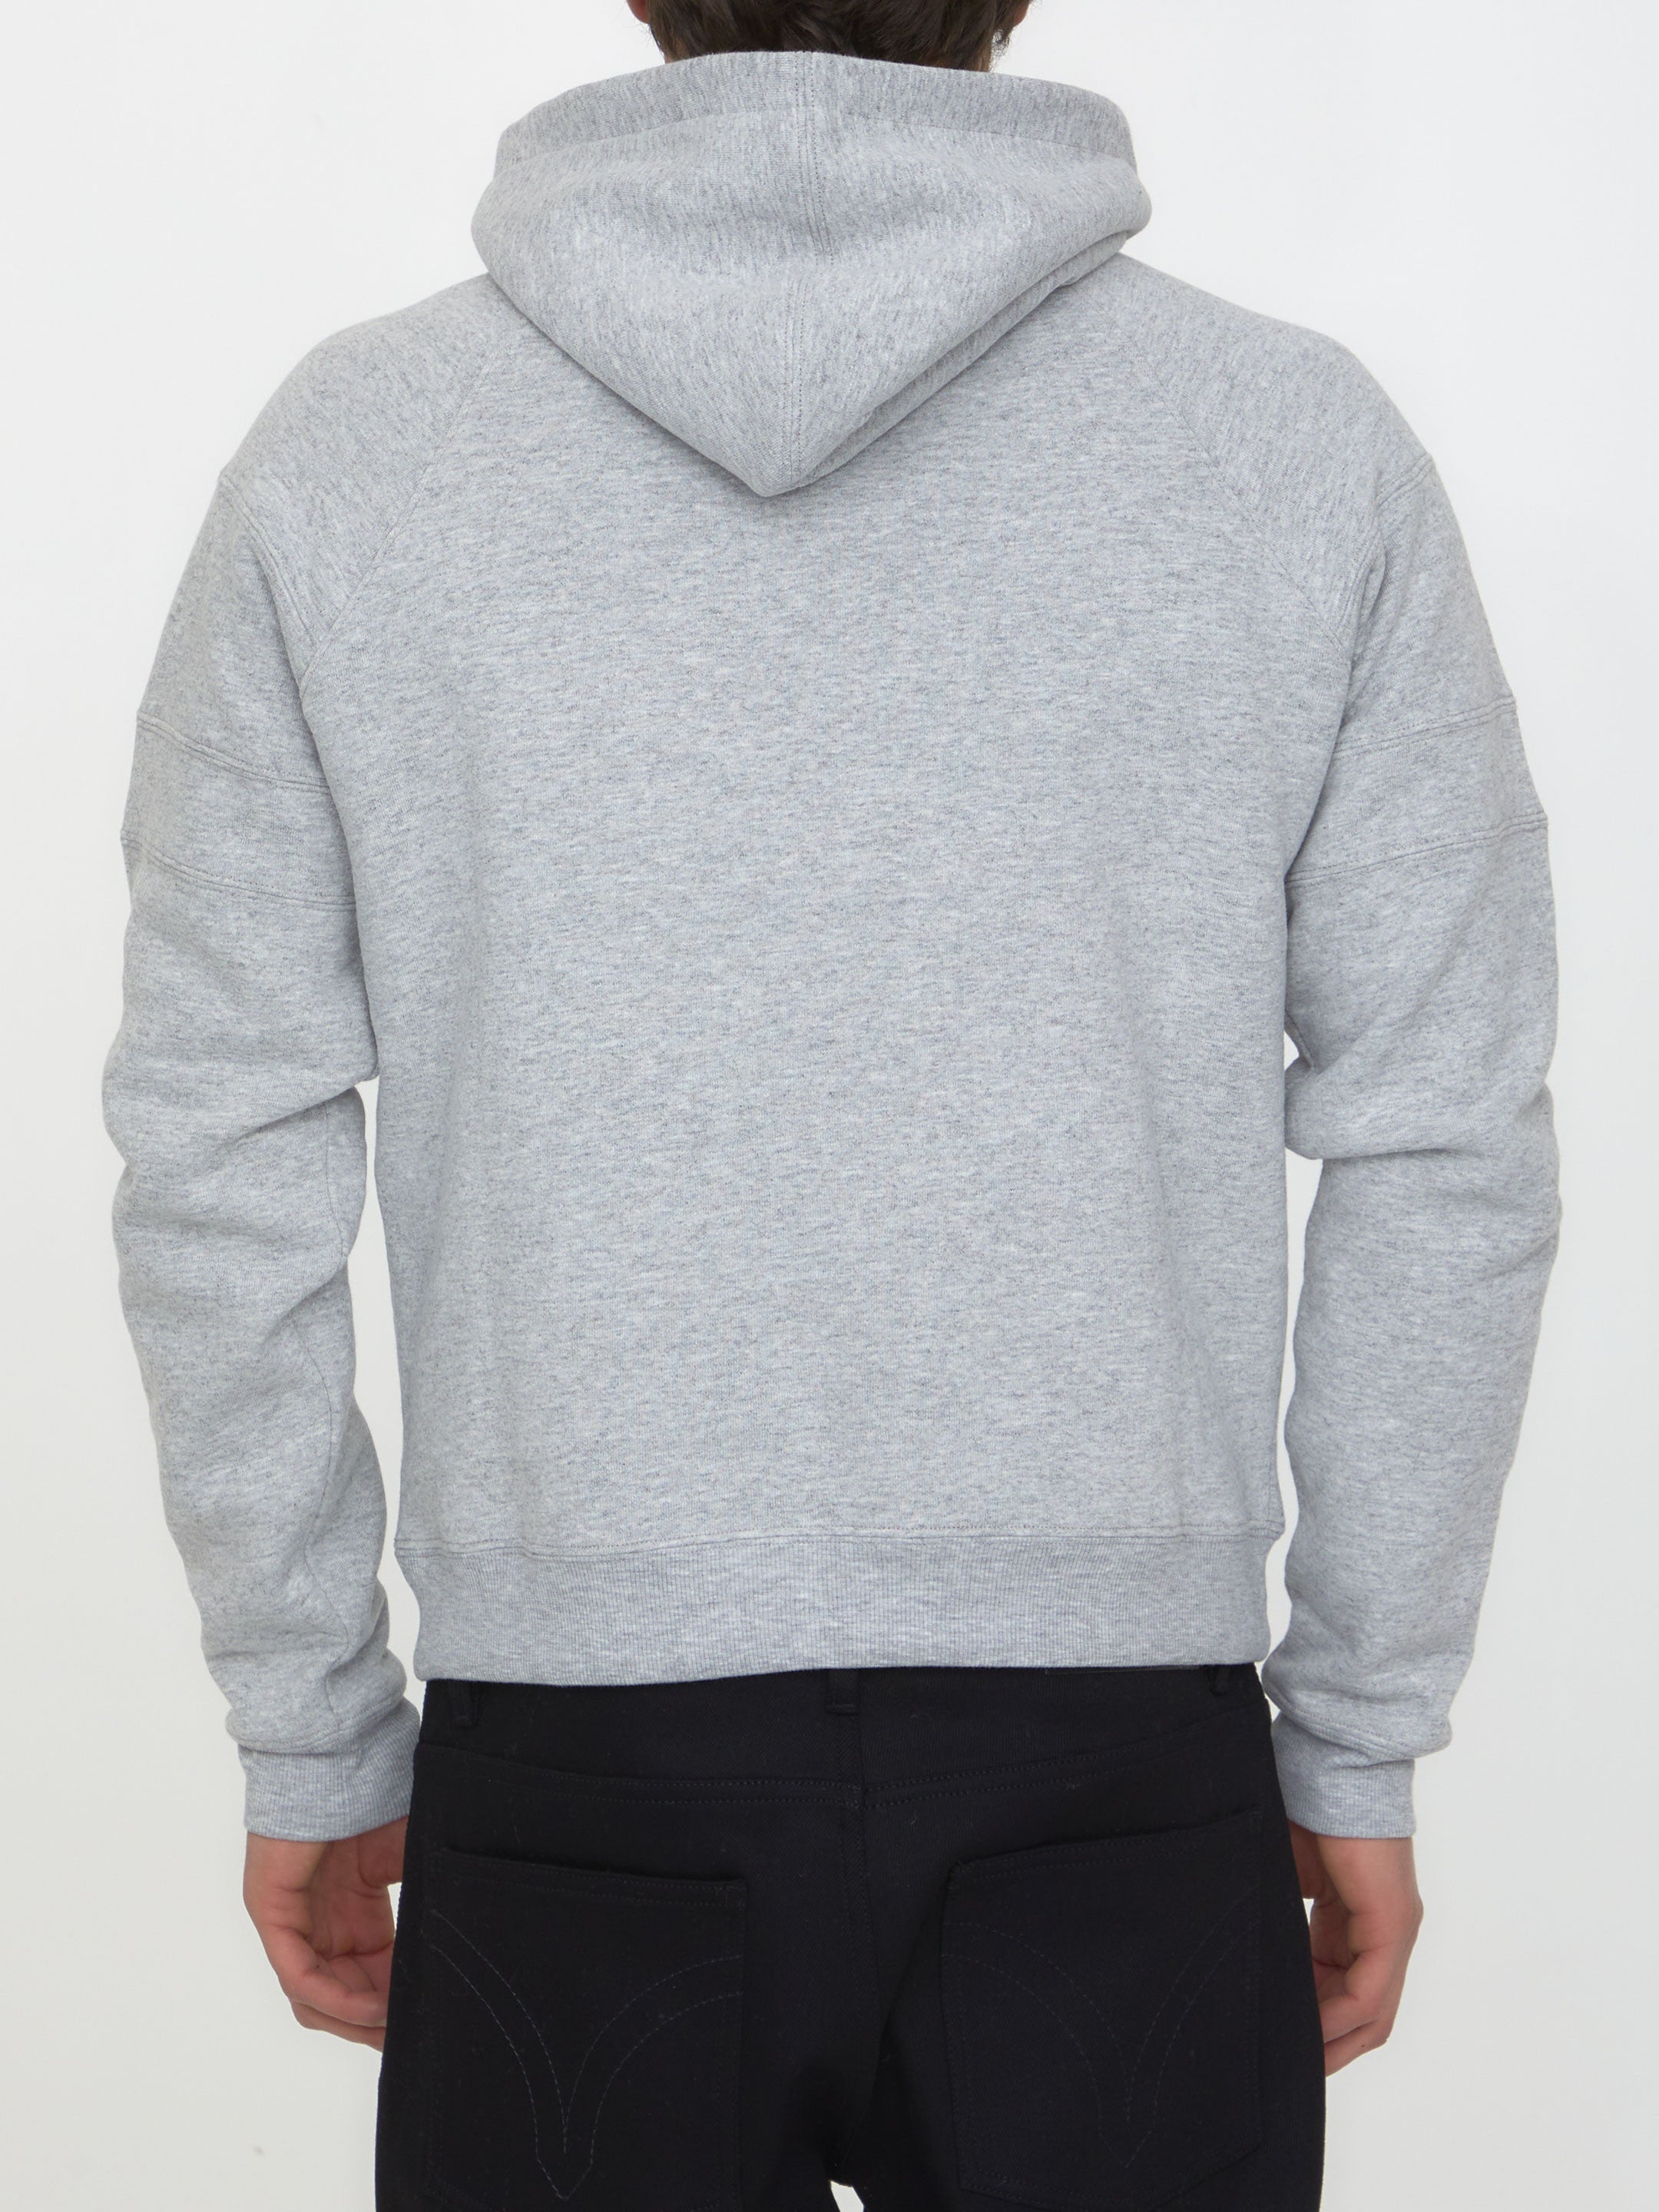 SAINT-LAURENT-OUTLET-SALE-Cotton-hoodie-with-logo-Strick-M-GREY-ARCHIVE-COLLECTION-4.jpg